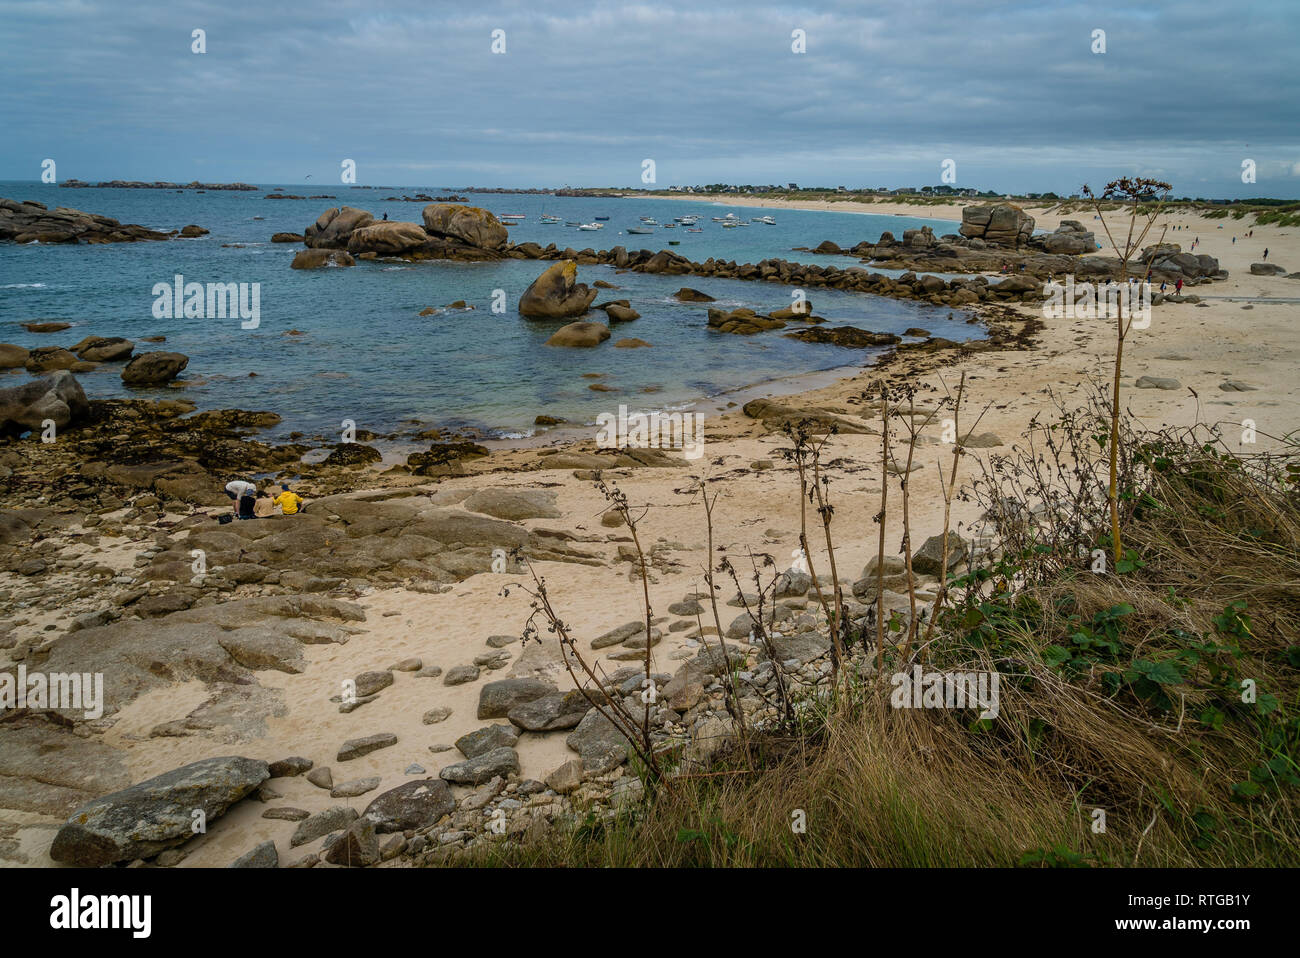 Meneham coast and beach in Brittany region in France Stock Photo